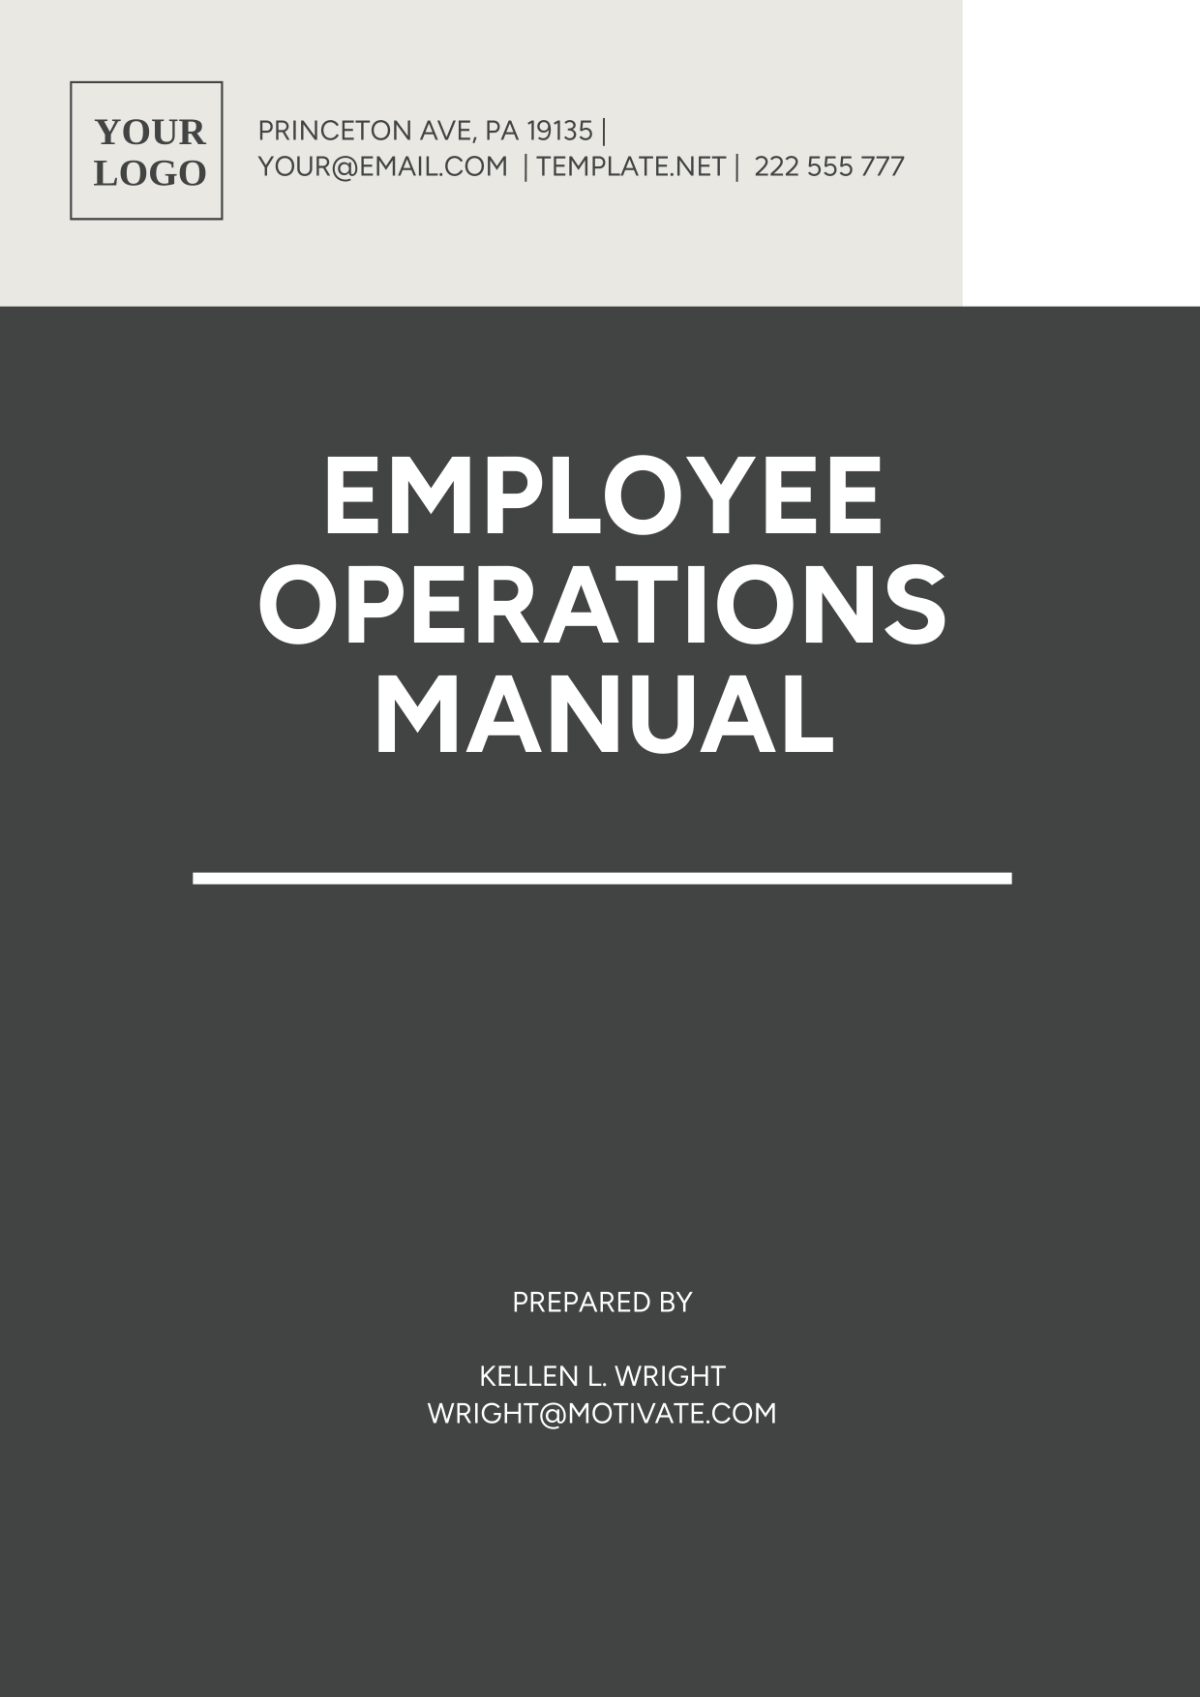 Employee Operations Manual Template